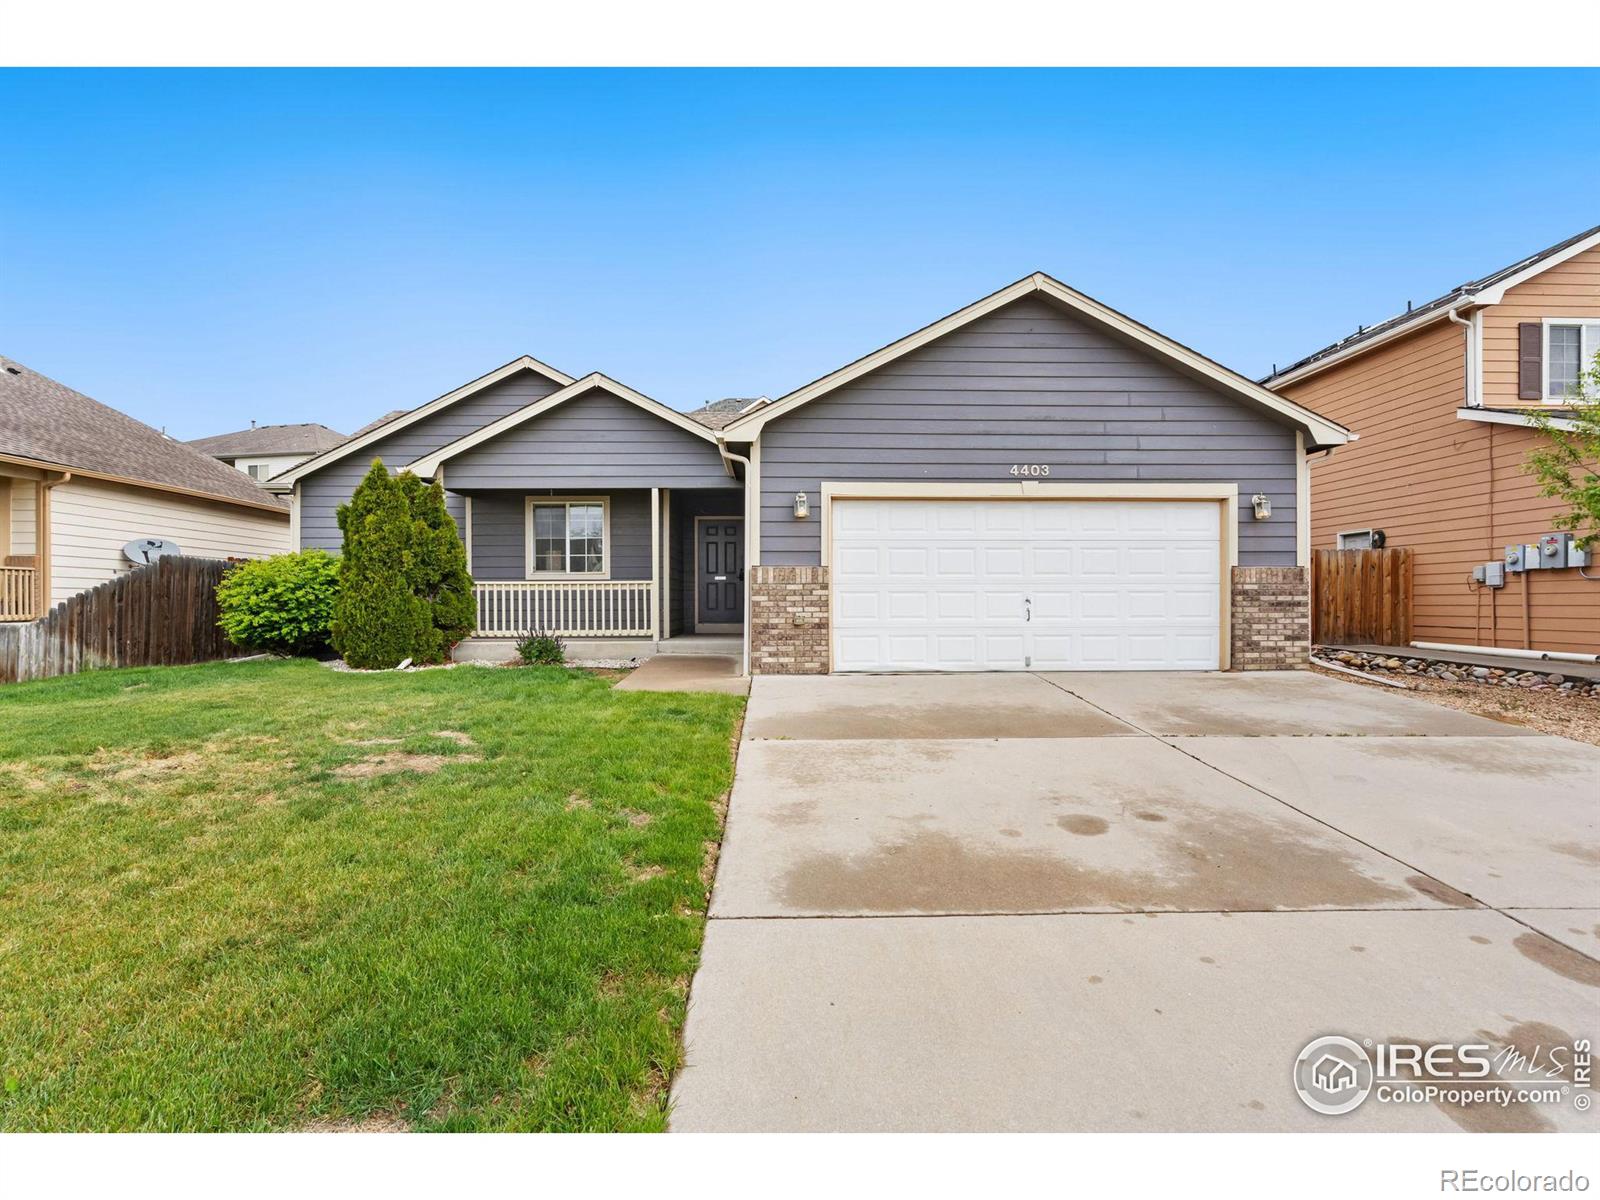 CMA Image for 4403 w 30th st rd,Greeley, Colorado